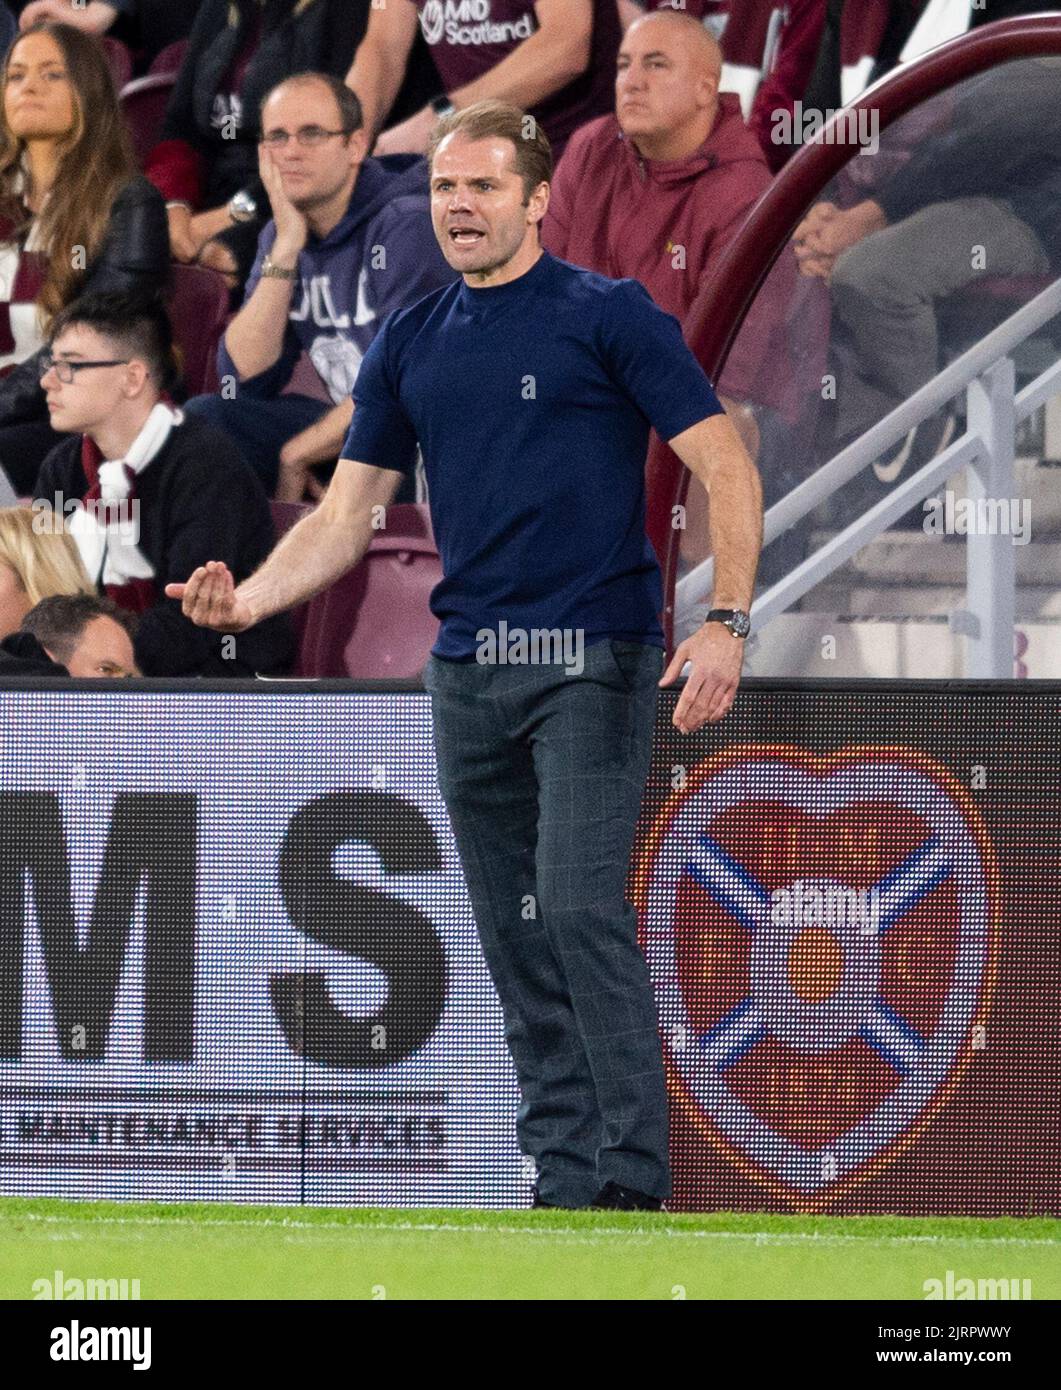 Edinburgh, UK. 25th Aug, 2022. Europa League Play-Off - Heart of Midlothian FC v Fc Zurich 25/08/2022. Hearts play host to FC Zurich in the Europa League Play-Offs at Tynecastle Park, Edinburgh, Midlothian, UK. Pic shows: Hearts' manager, Robbie Neilson, shouts to his players from the sidelines. Credit: Ian Jacobs/Alamy Live News Stock Photo